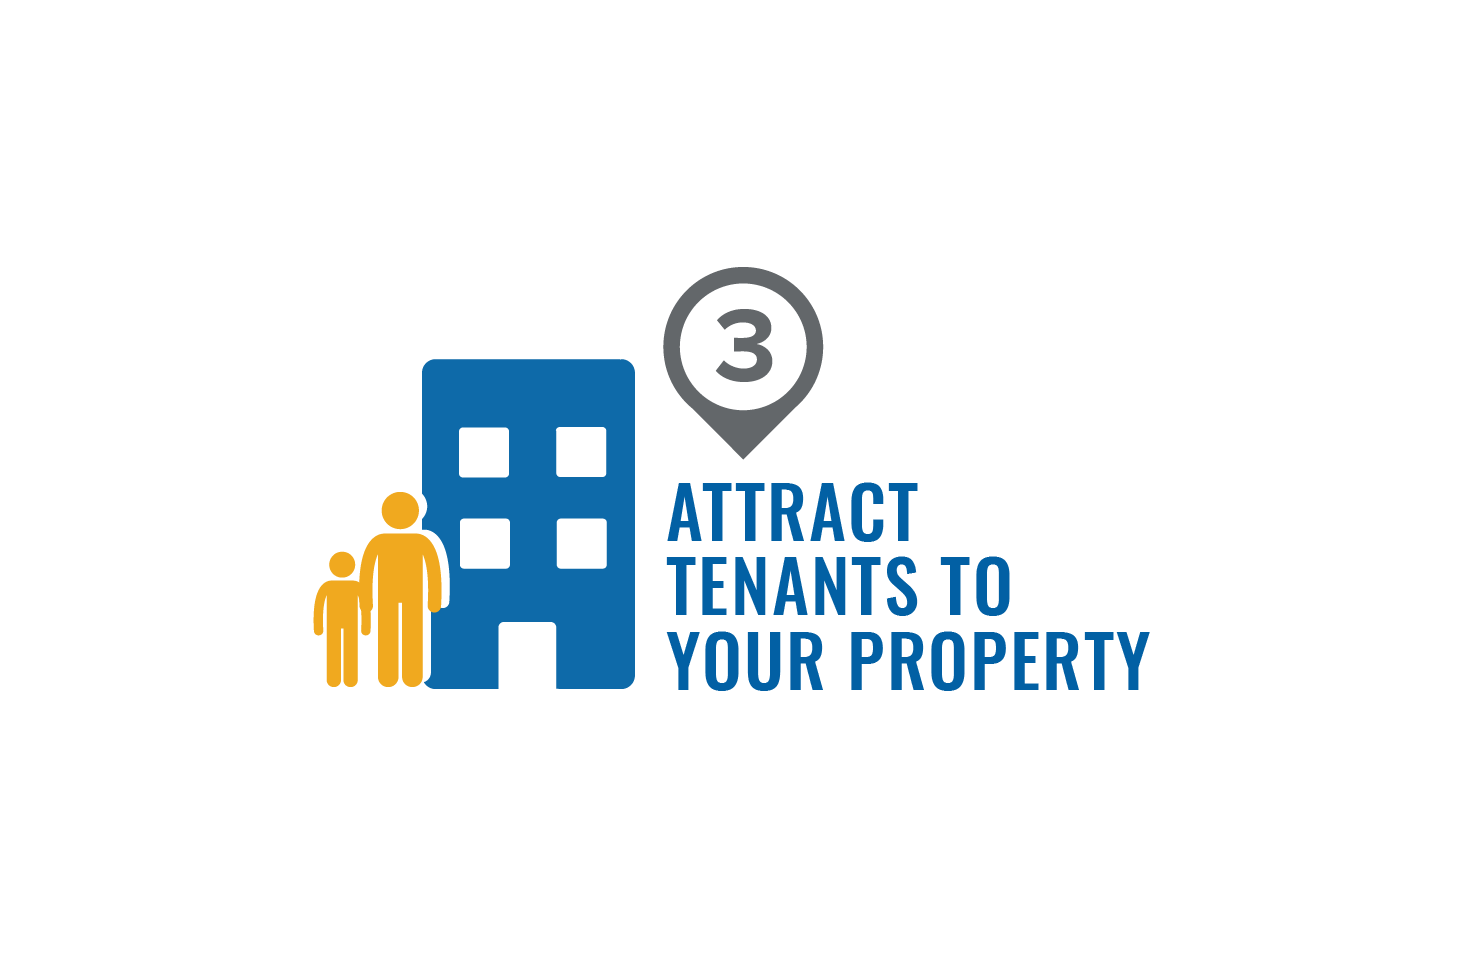 Step 3 - Attract Tenants to Your Property